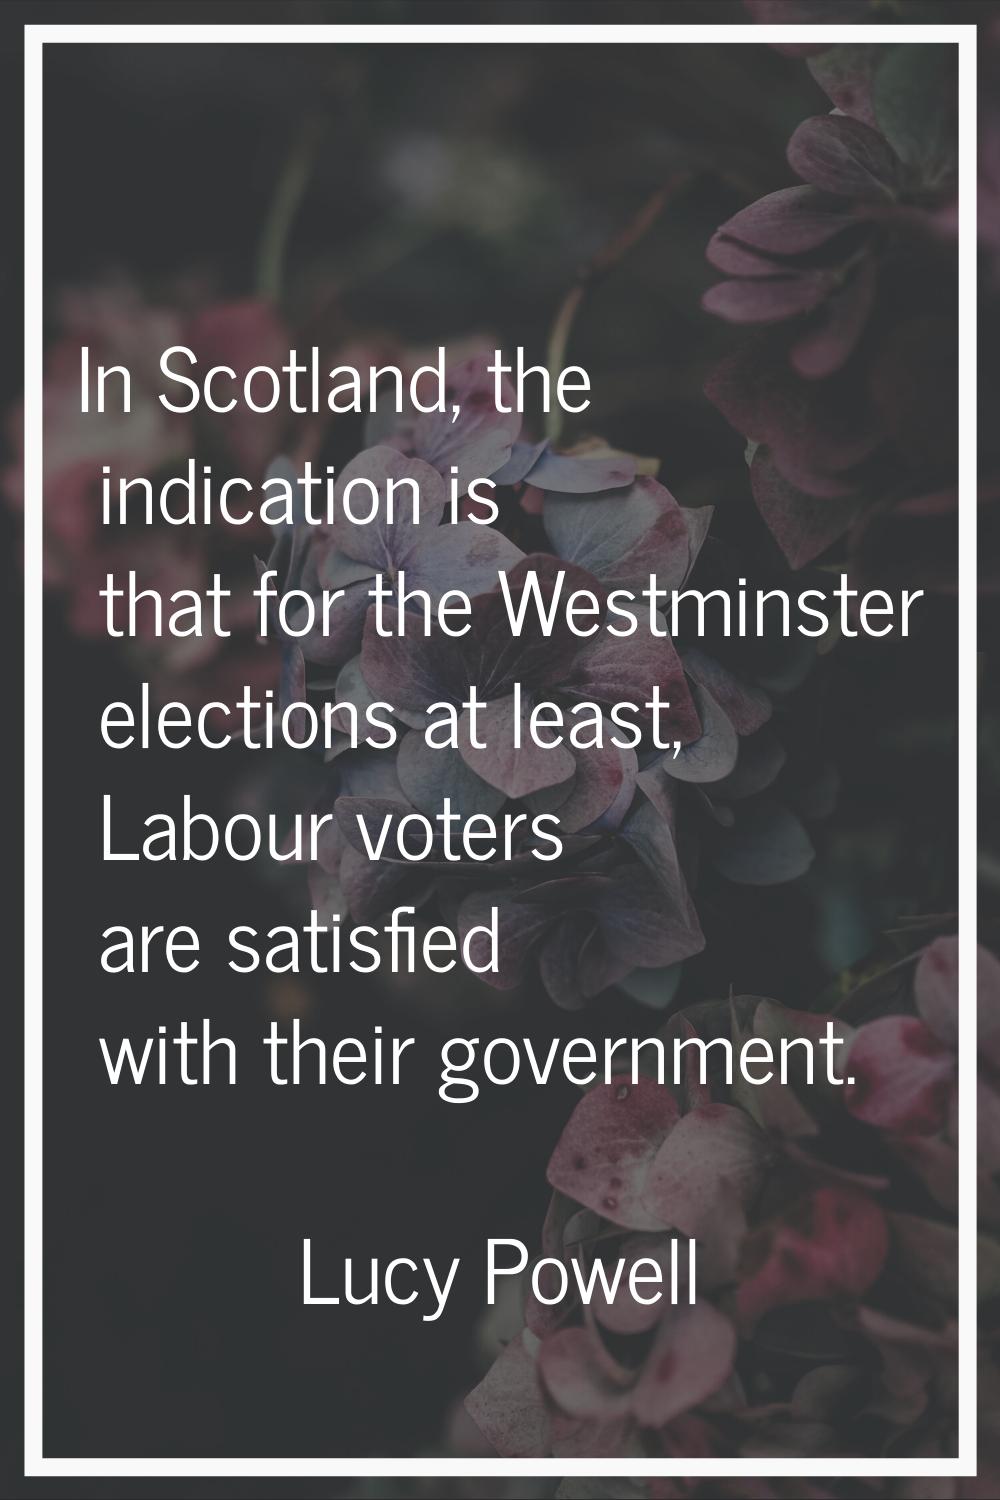 In Scotland, the indication is that for the Westminster elections at least, Labour voters are satis